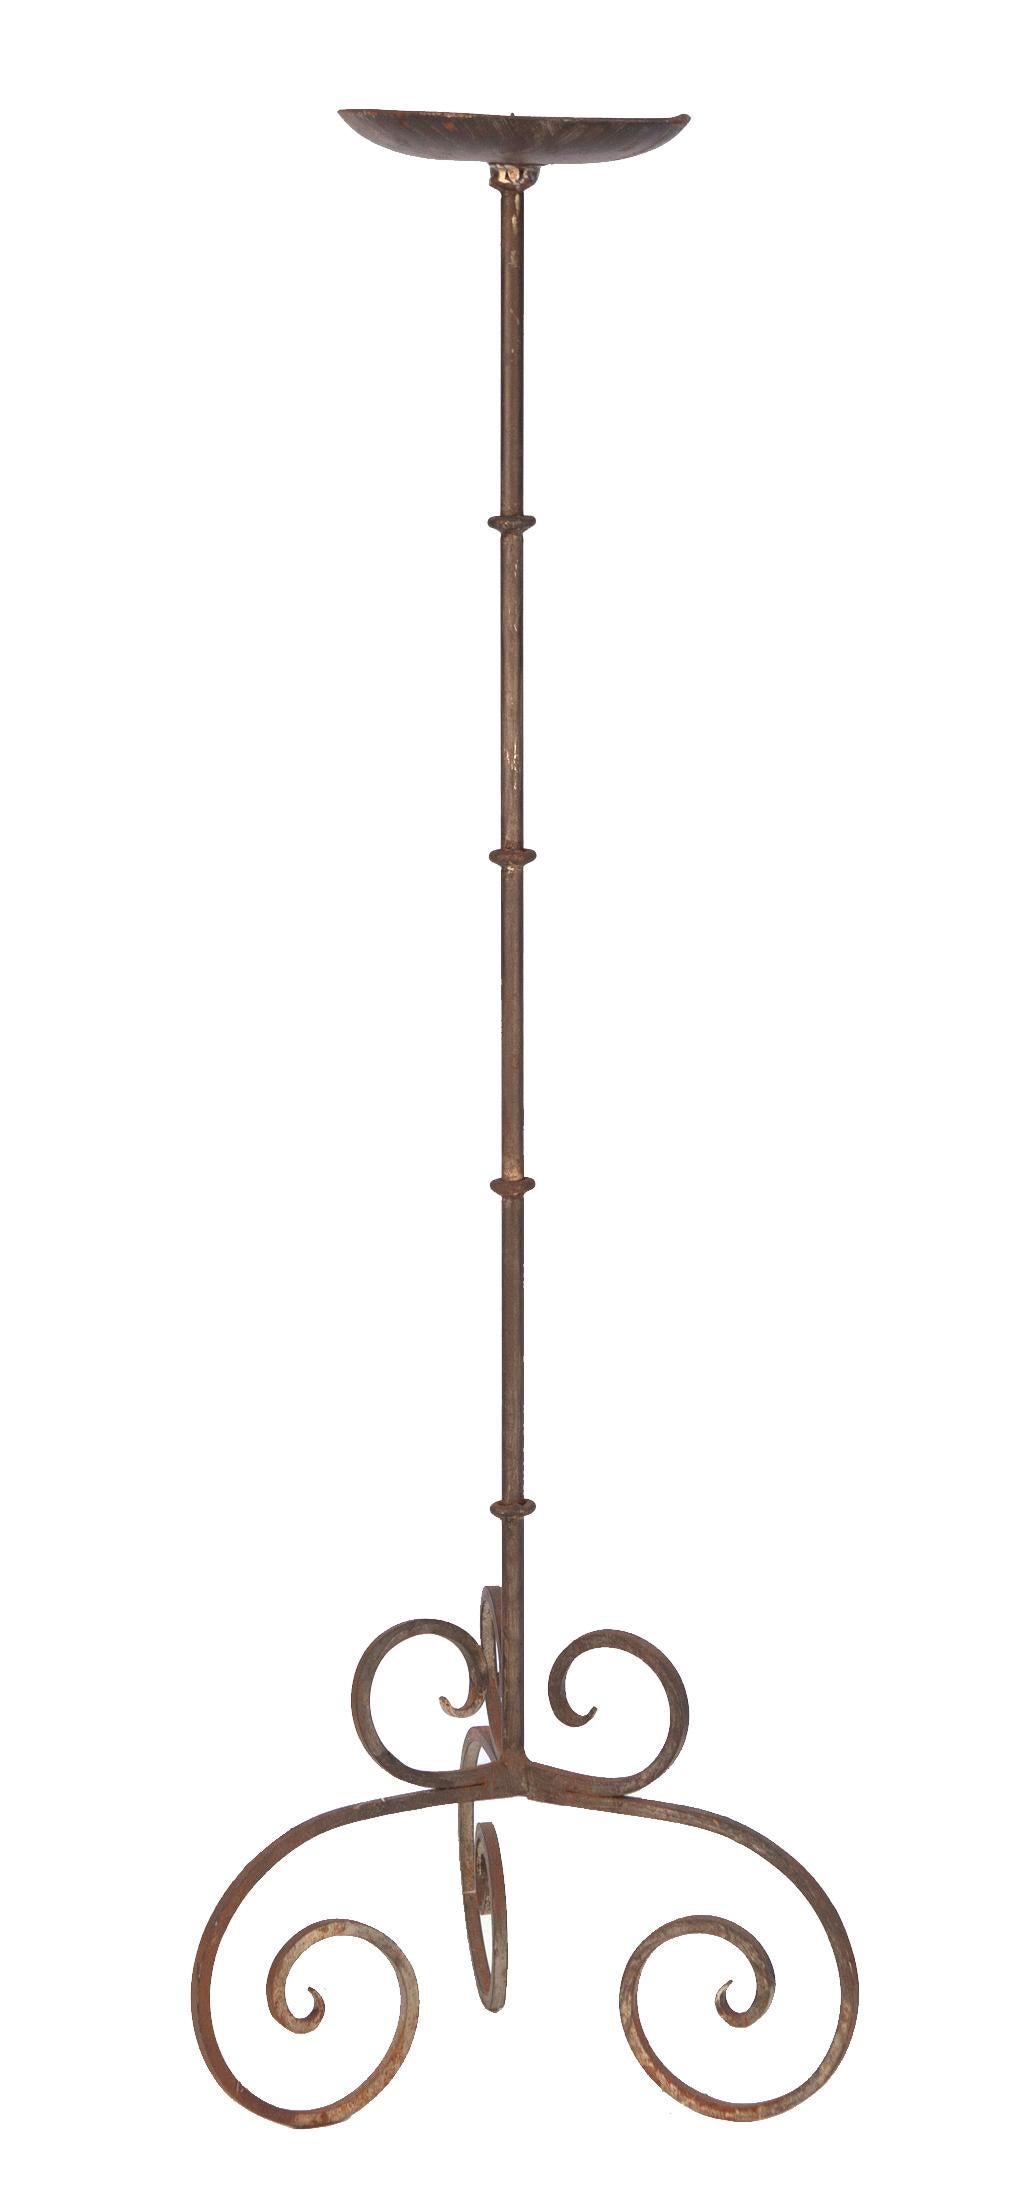 Tall wrought iron candle standing candle stiholder simple stem with scrolled tripod legs.